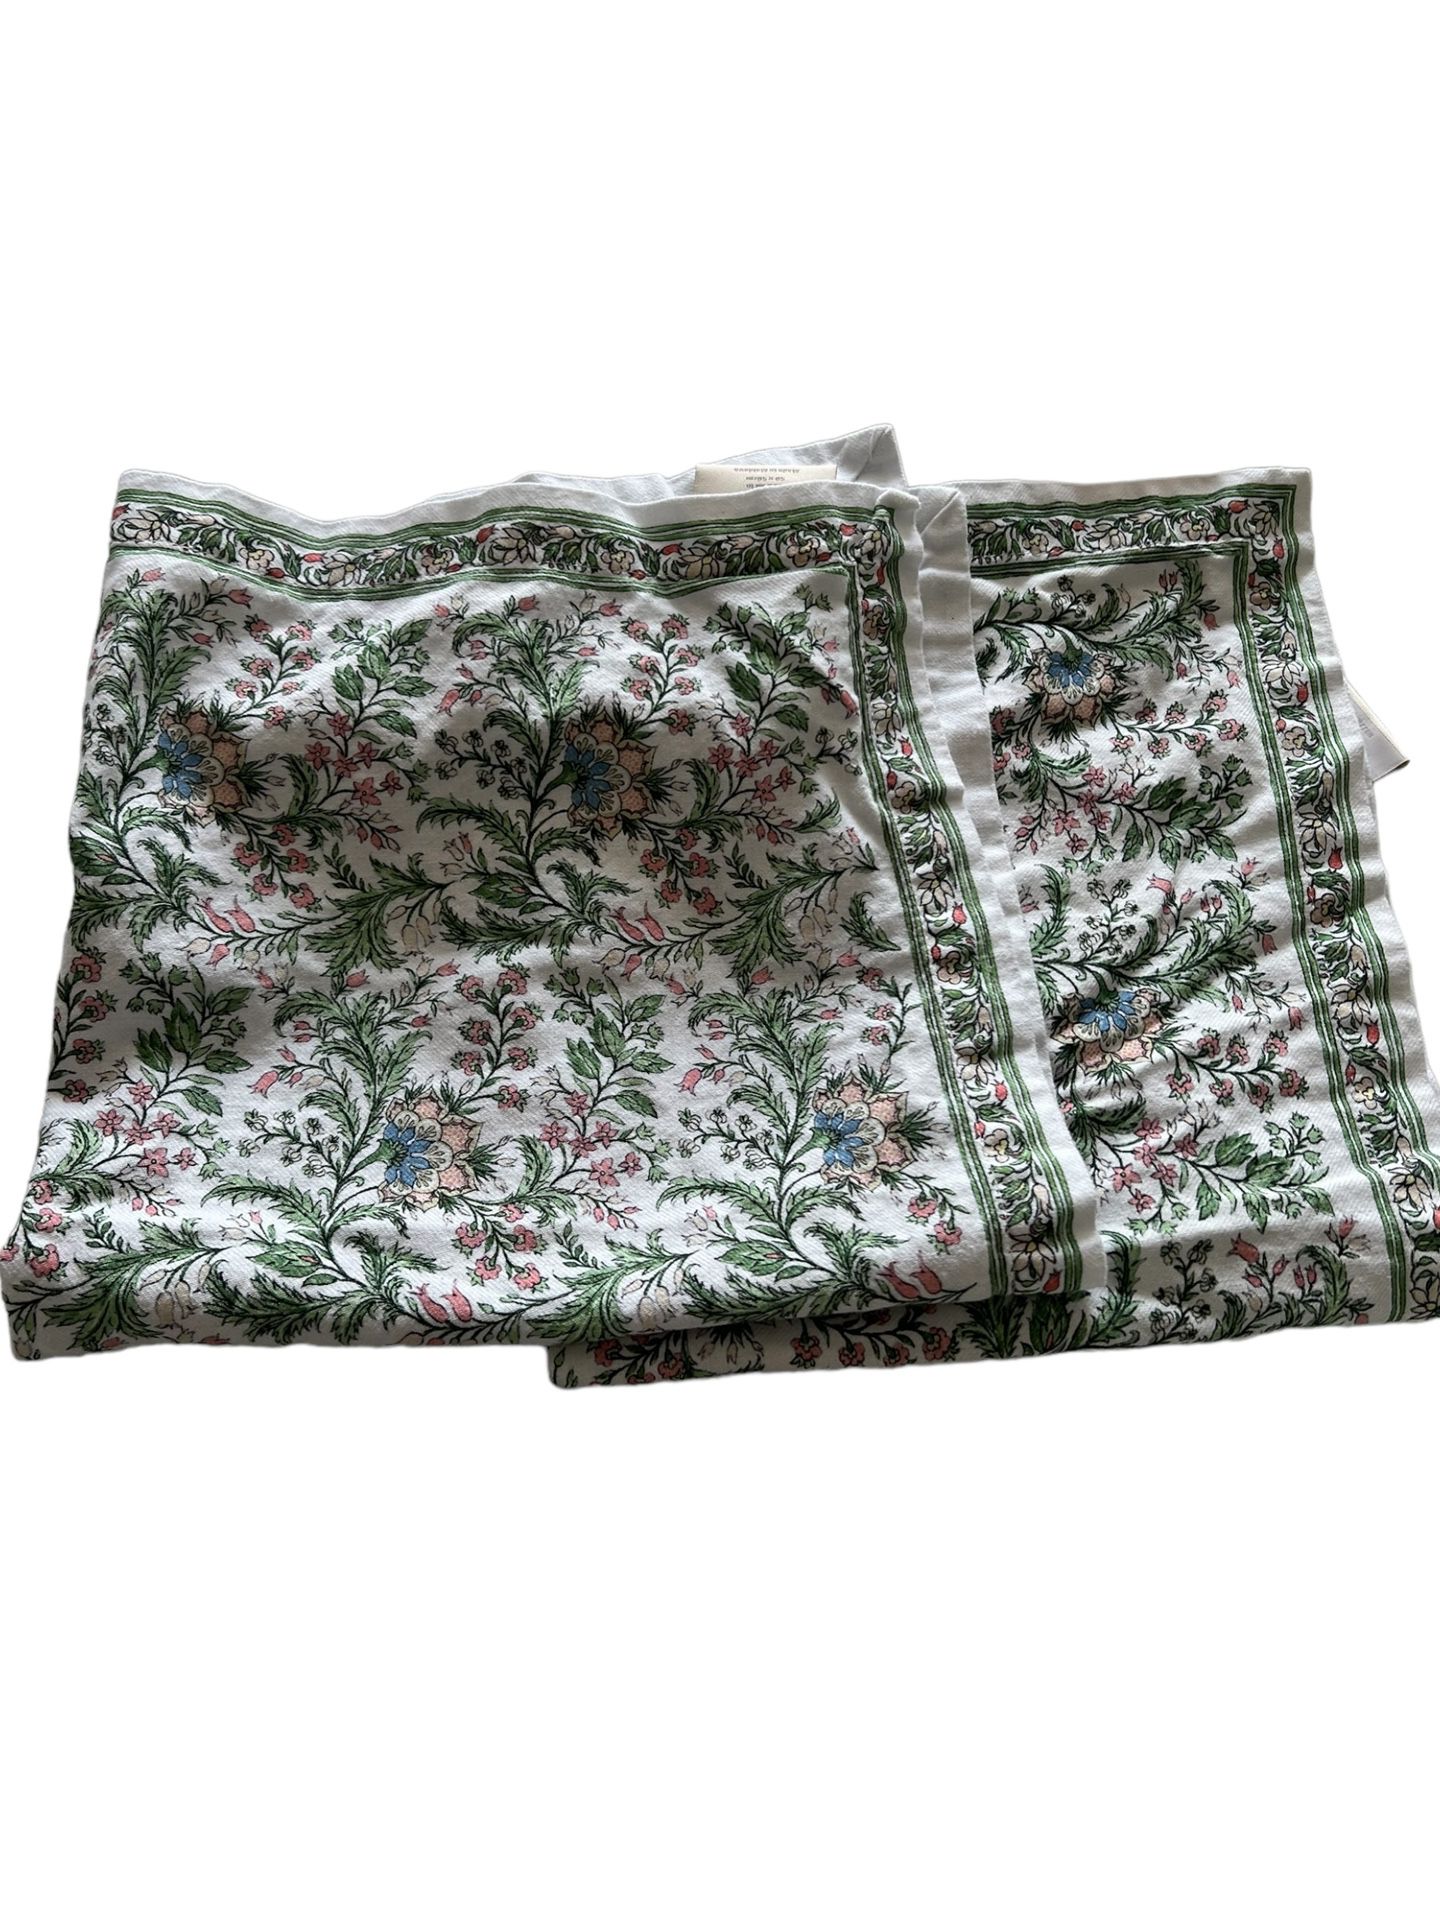 Southern Living Norah Floral Block Print Pink Napkins, Set of 2 20” X 20” Read  There are two small stains in one of the napkins in the back that can 